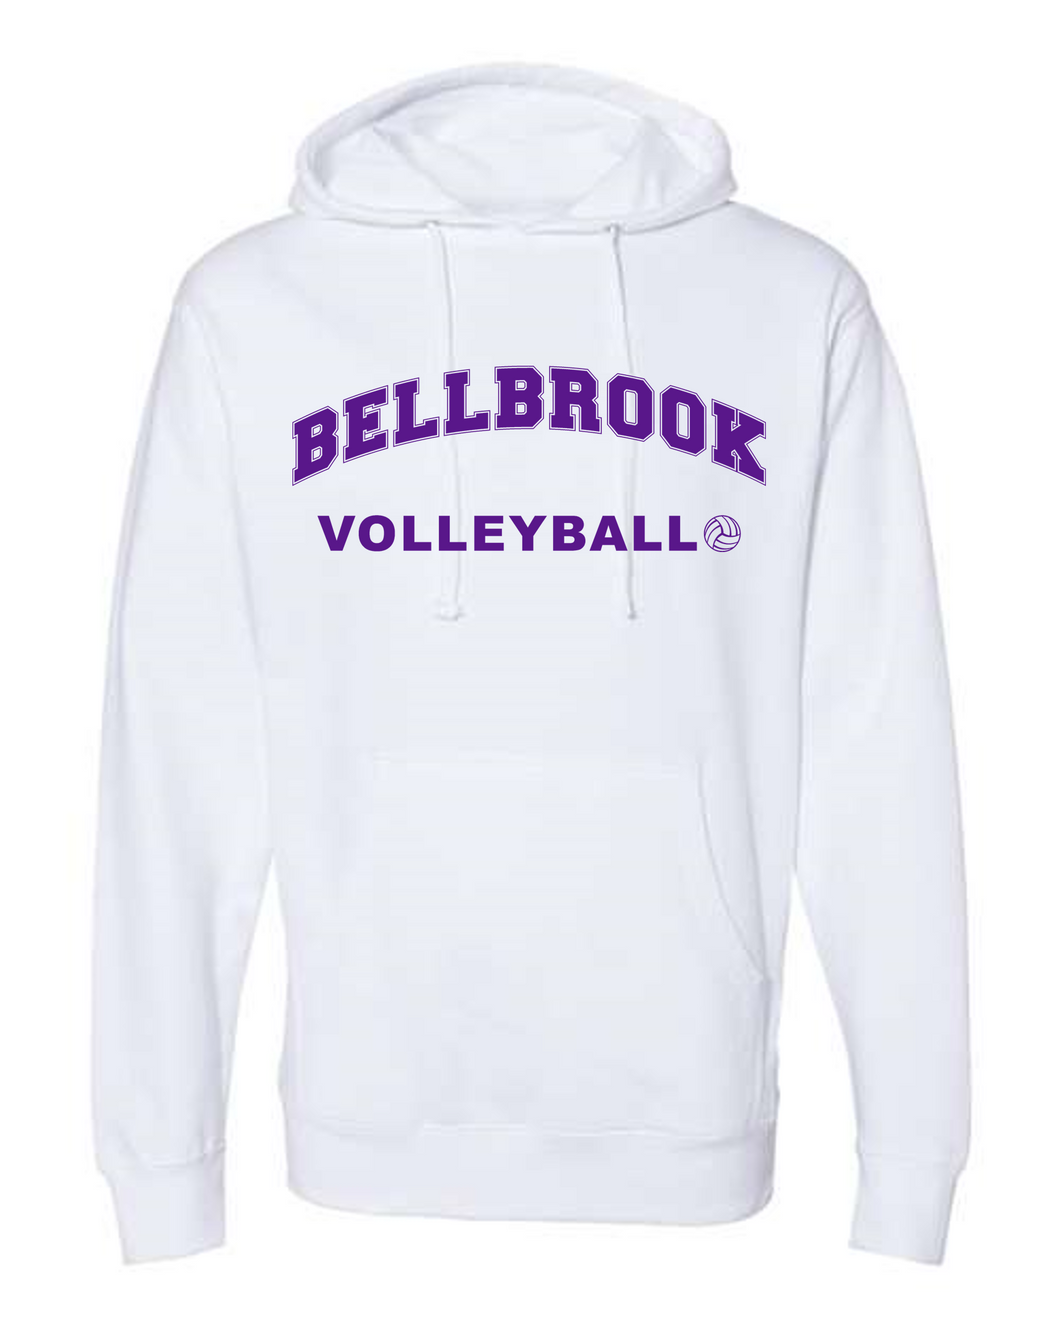 BHS Volleyball Adult Softstyle White Sweatshirt * PLAYER'S FAVORITE*